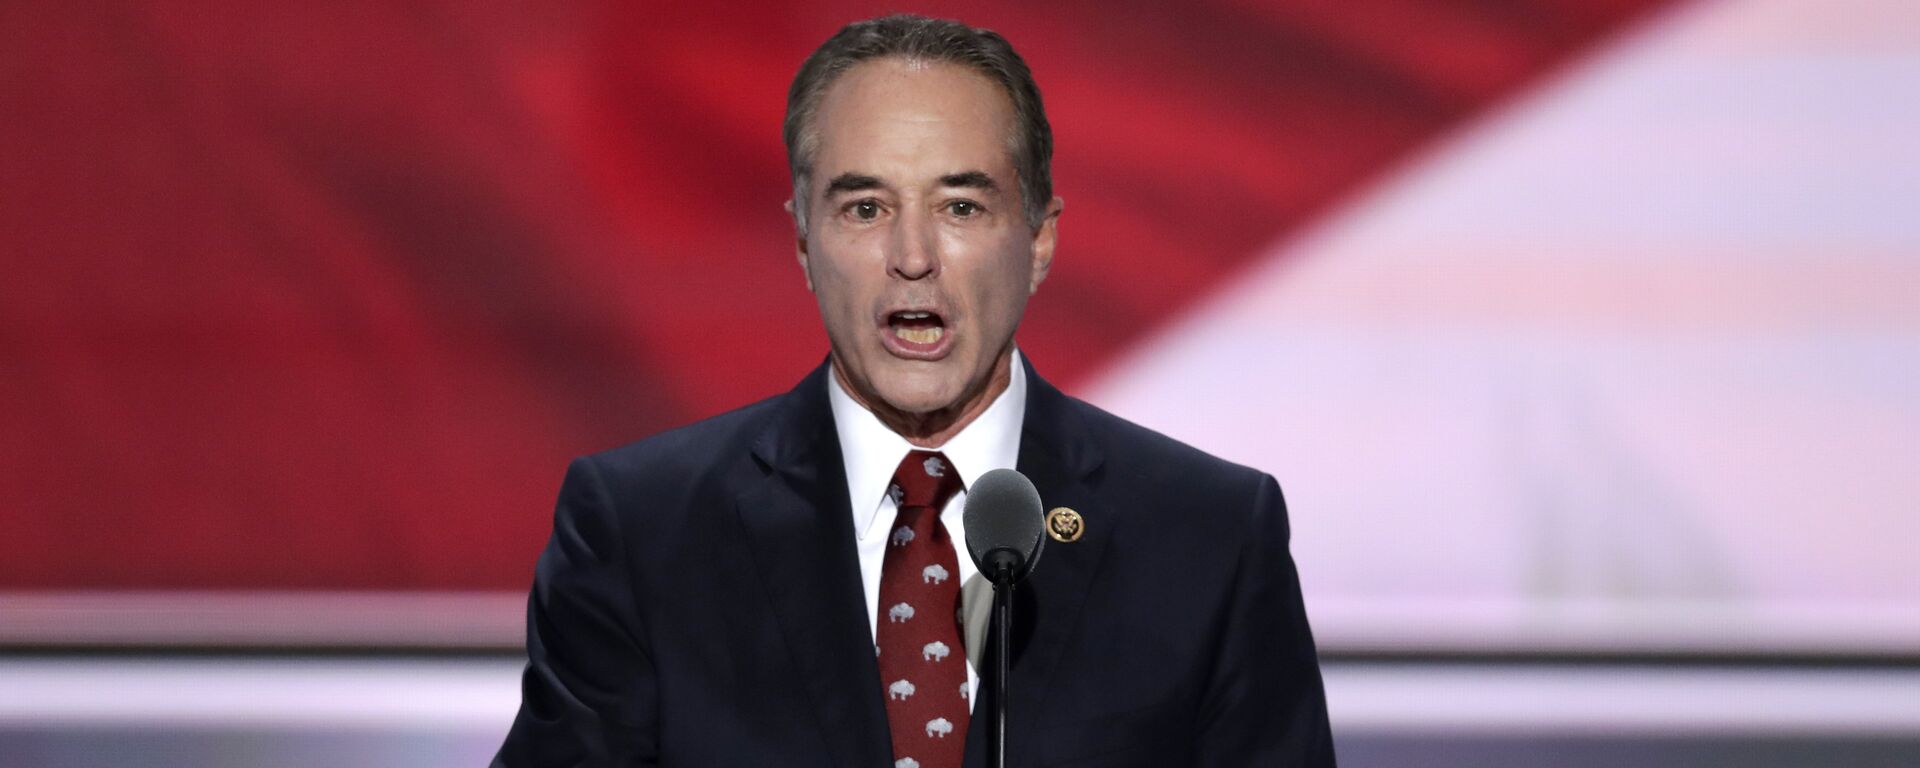 In this July 19, 2016 file photo, Rep. Chris Collins, R-NY. speaks in Cleveland. - Sputnik International, 1920, 09.08.2018